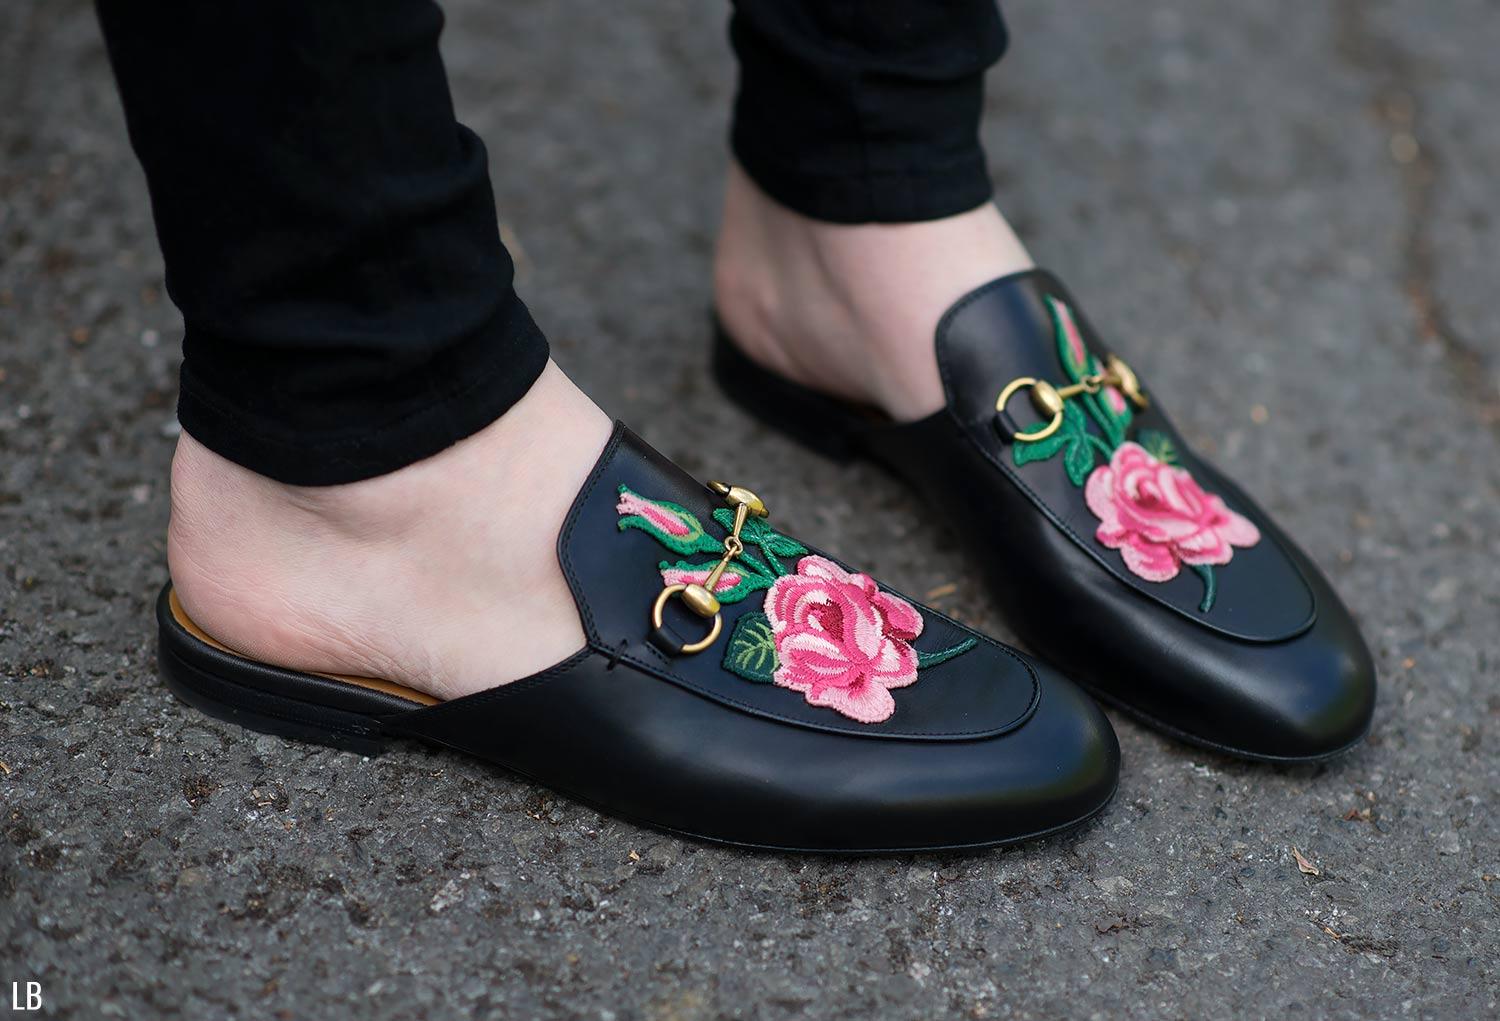 My New Gucci Princetown Floral Embroidered Loafers Review | Raindrops of Sapphire